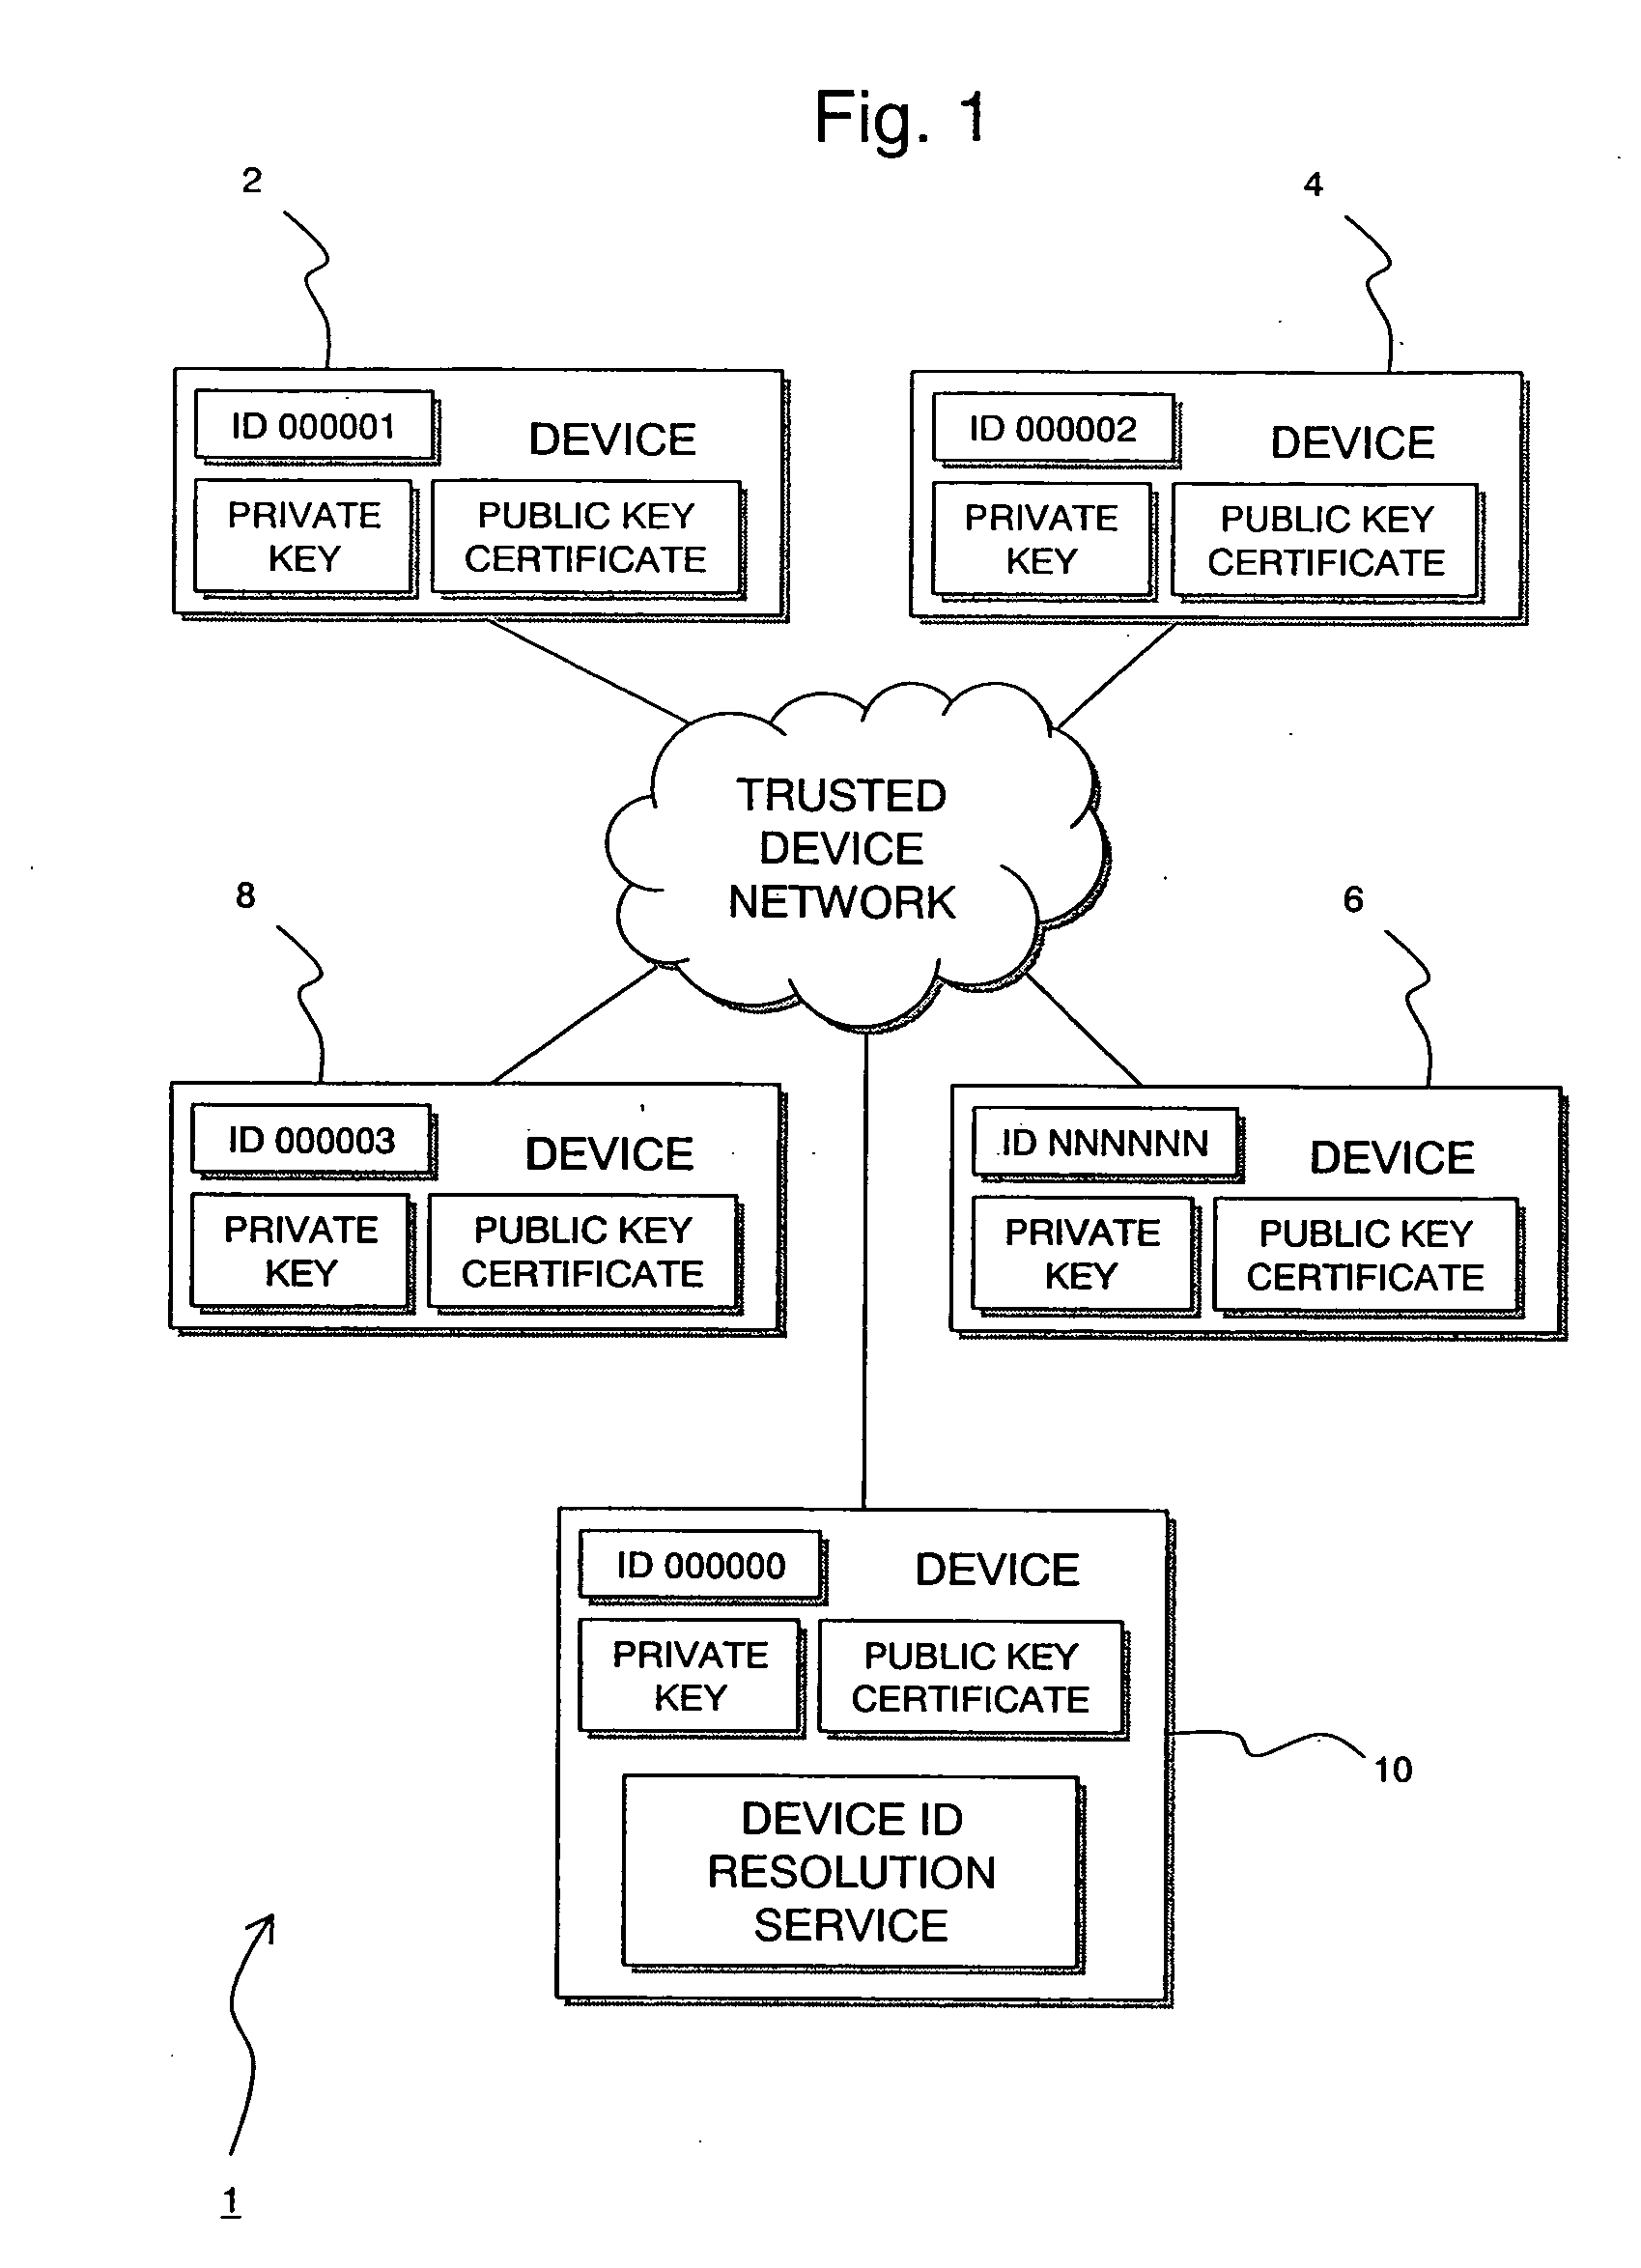 Method and apparatus for performing a secure transaction in a trusted network